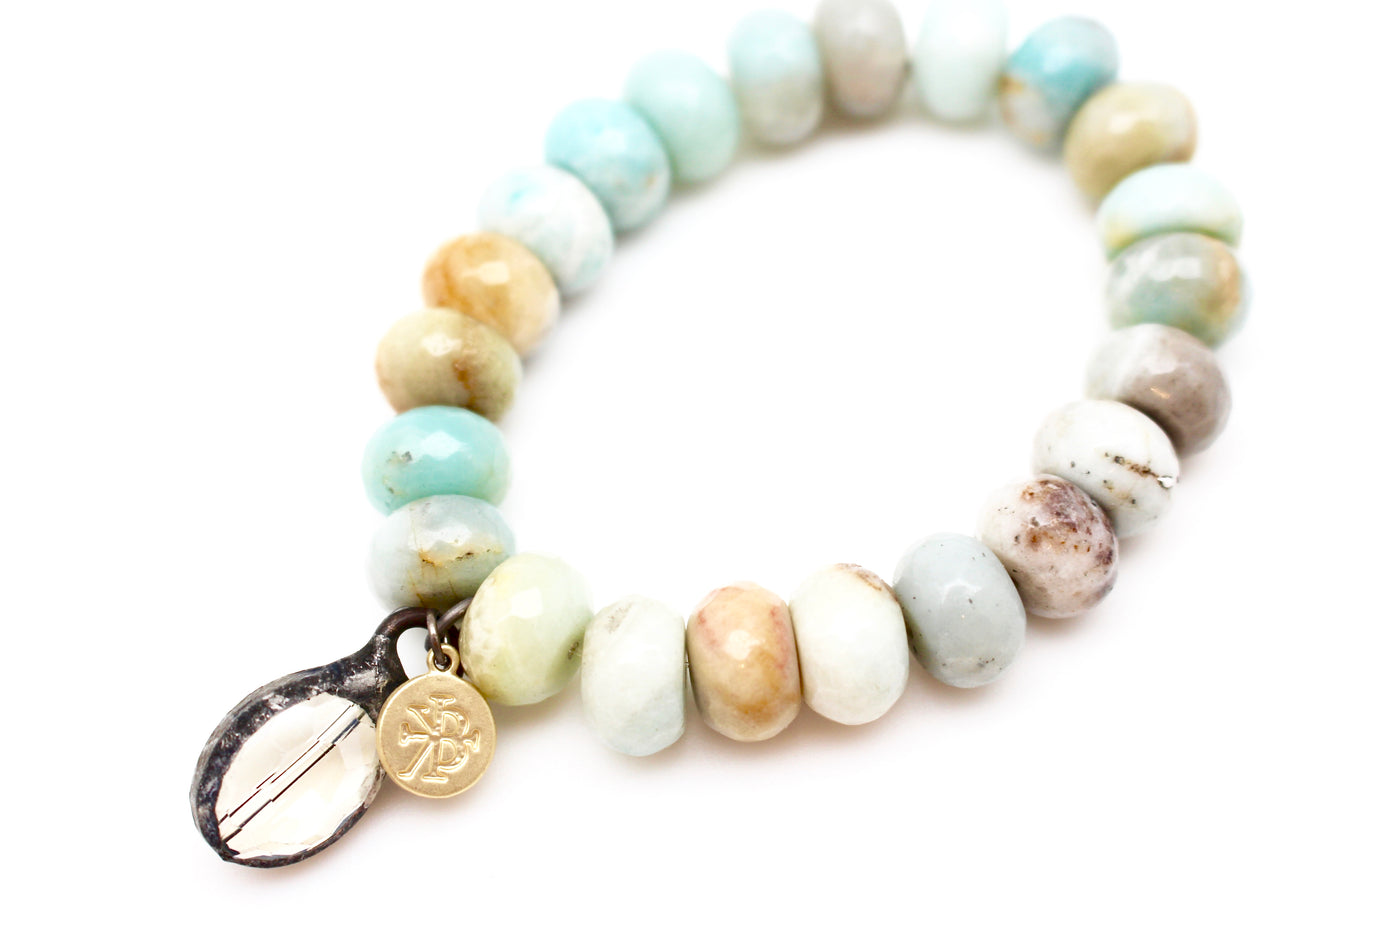 Faceted Rondelle Amazonite Bracelet by Karli Buxton - Corinne an Affordable Women's Clothing Boutique in the US USA